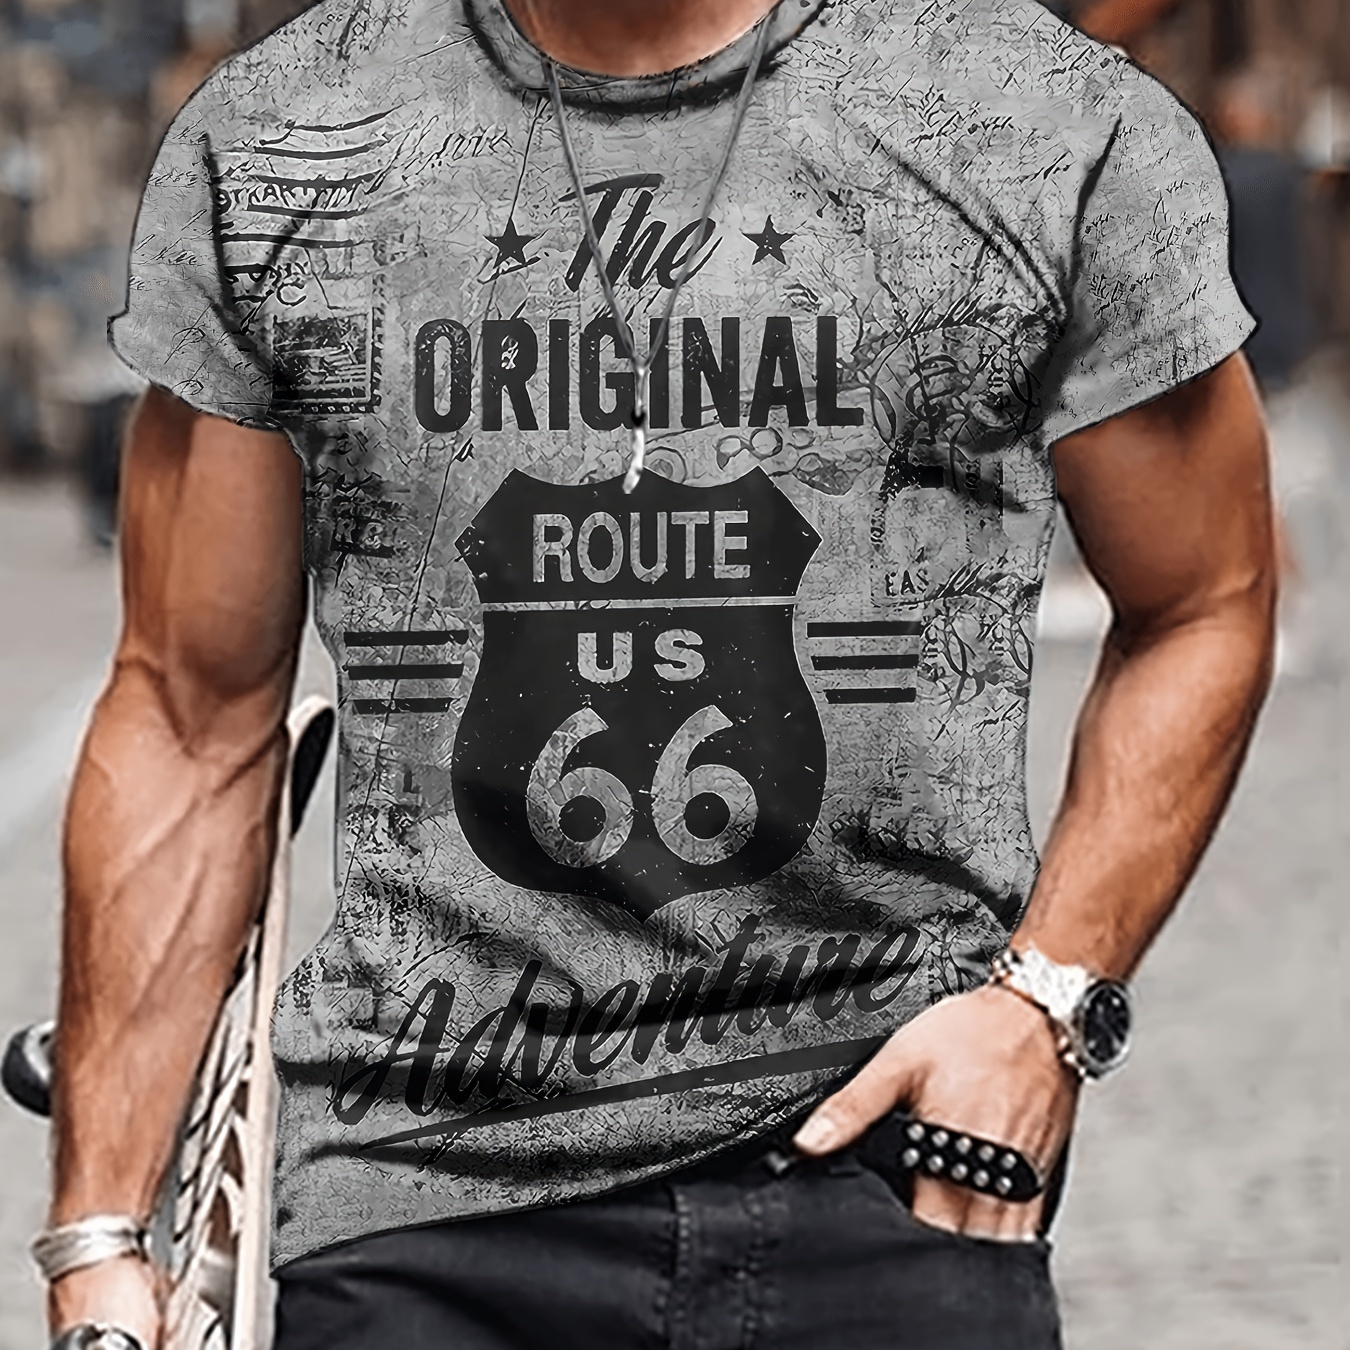 

Men's Route Us 66 Graphic Print T-shirt, Short Sleeve Crew Neck Tee, Men's Clothing For Outdoor